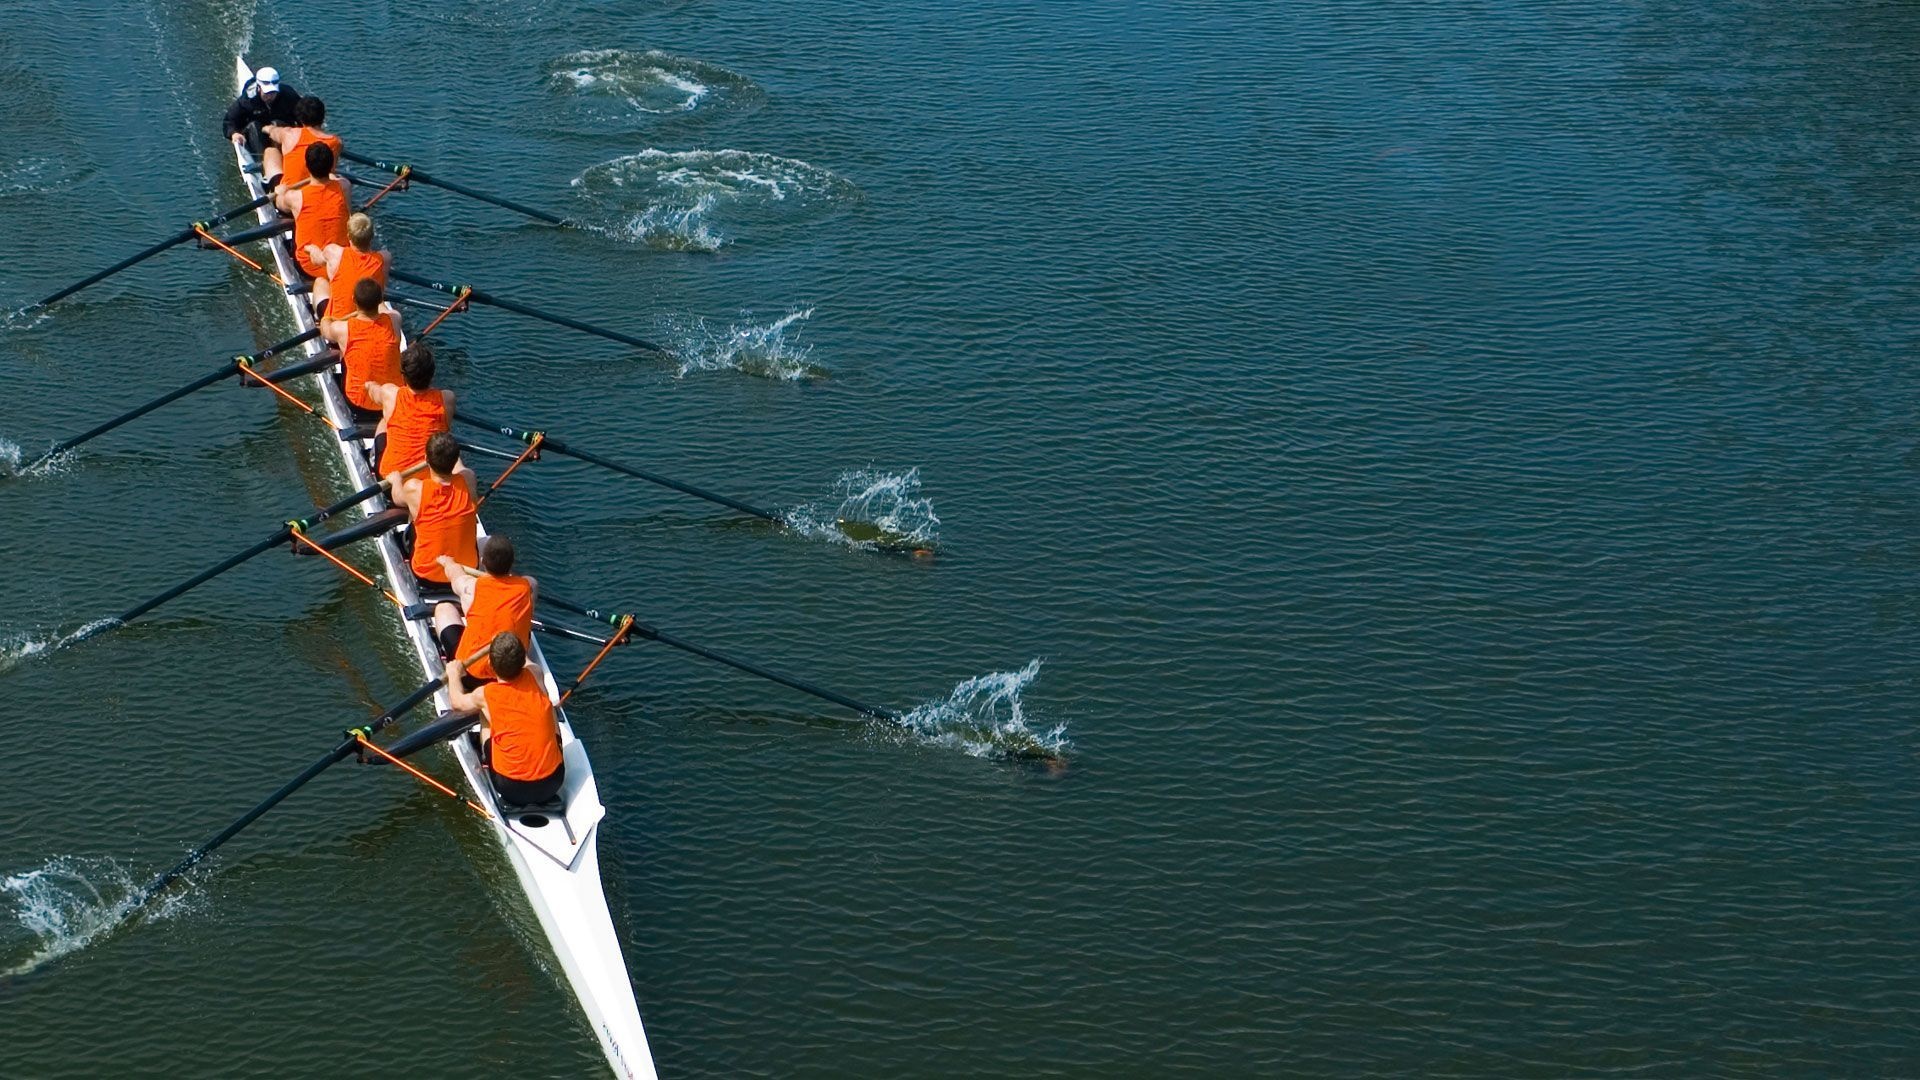 Rowing: Sweep pulling, Navigating a boat with one oar for each person only, A competitive water sports discipline. 1920x1080 Full HD Background.